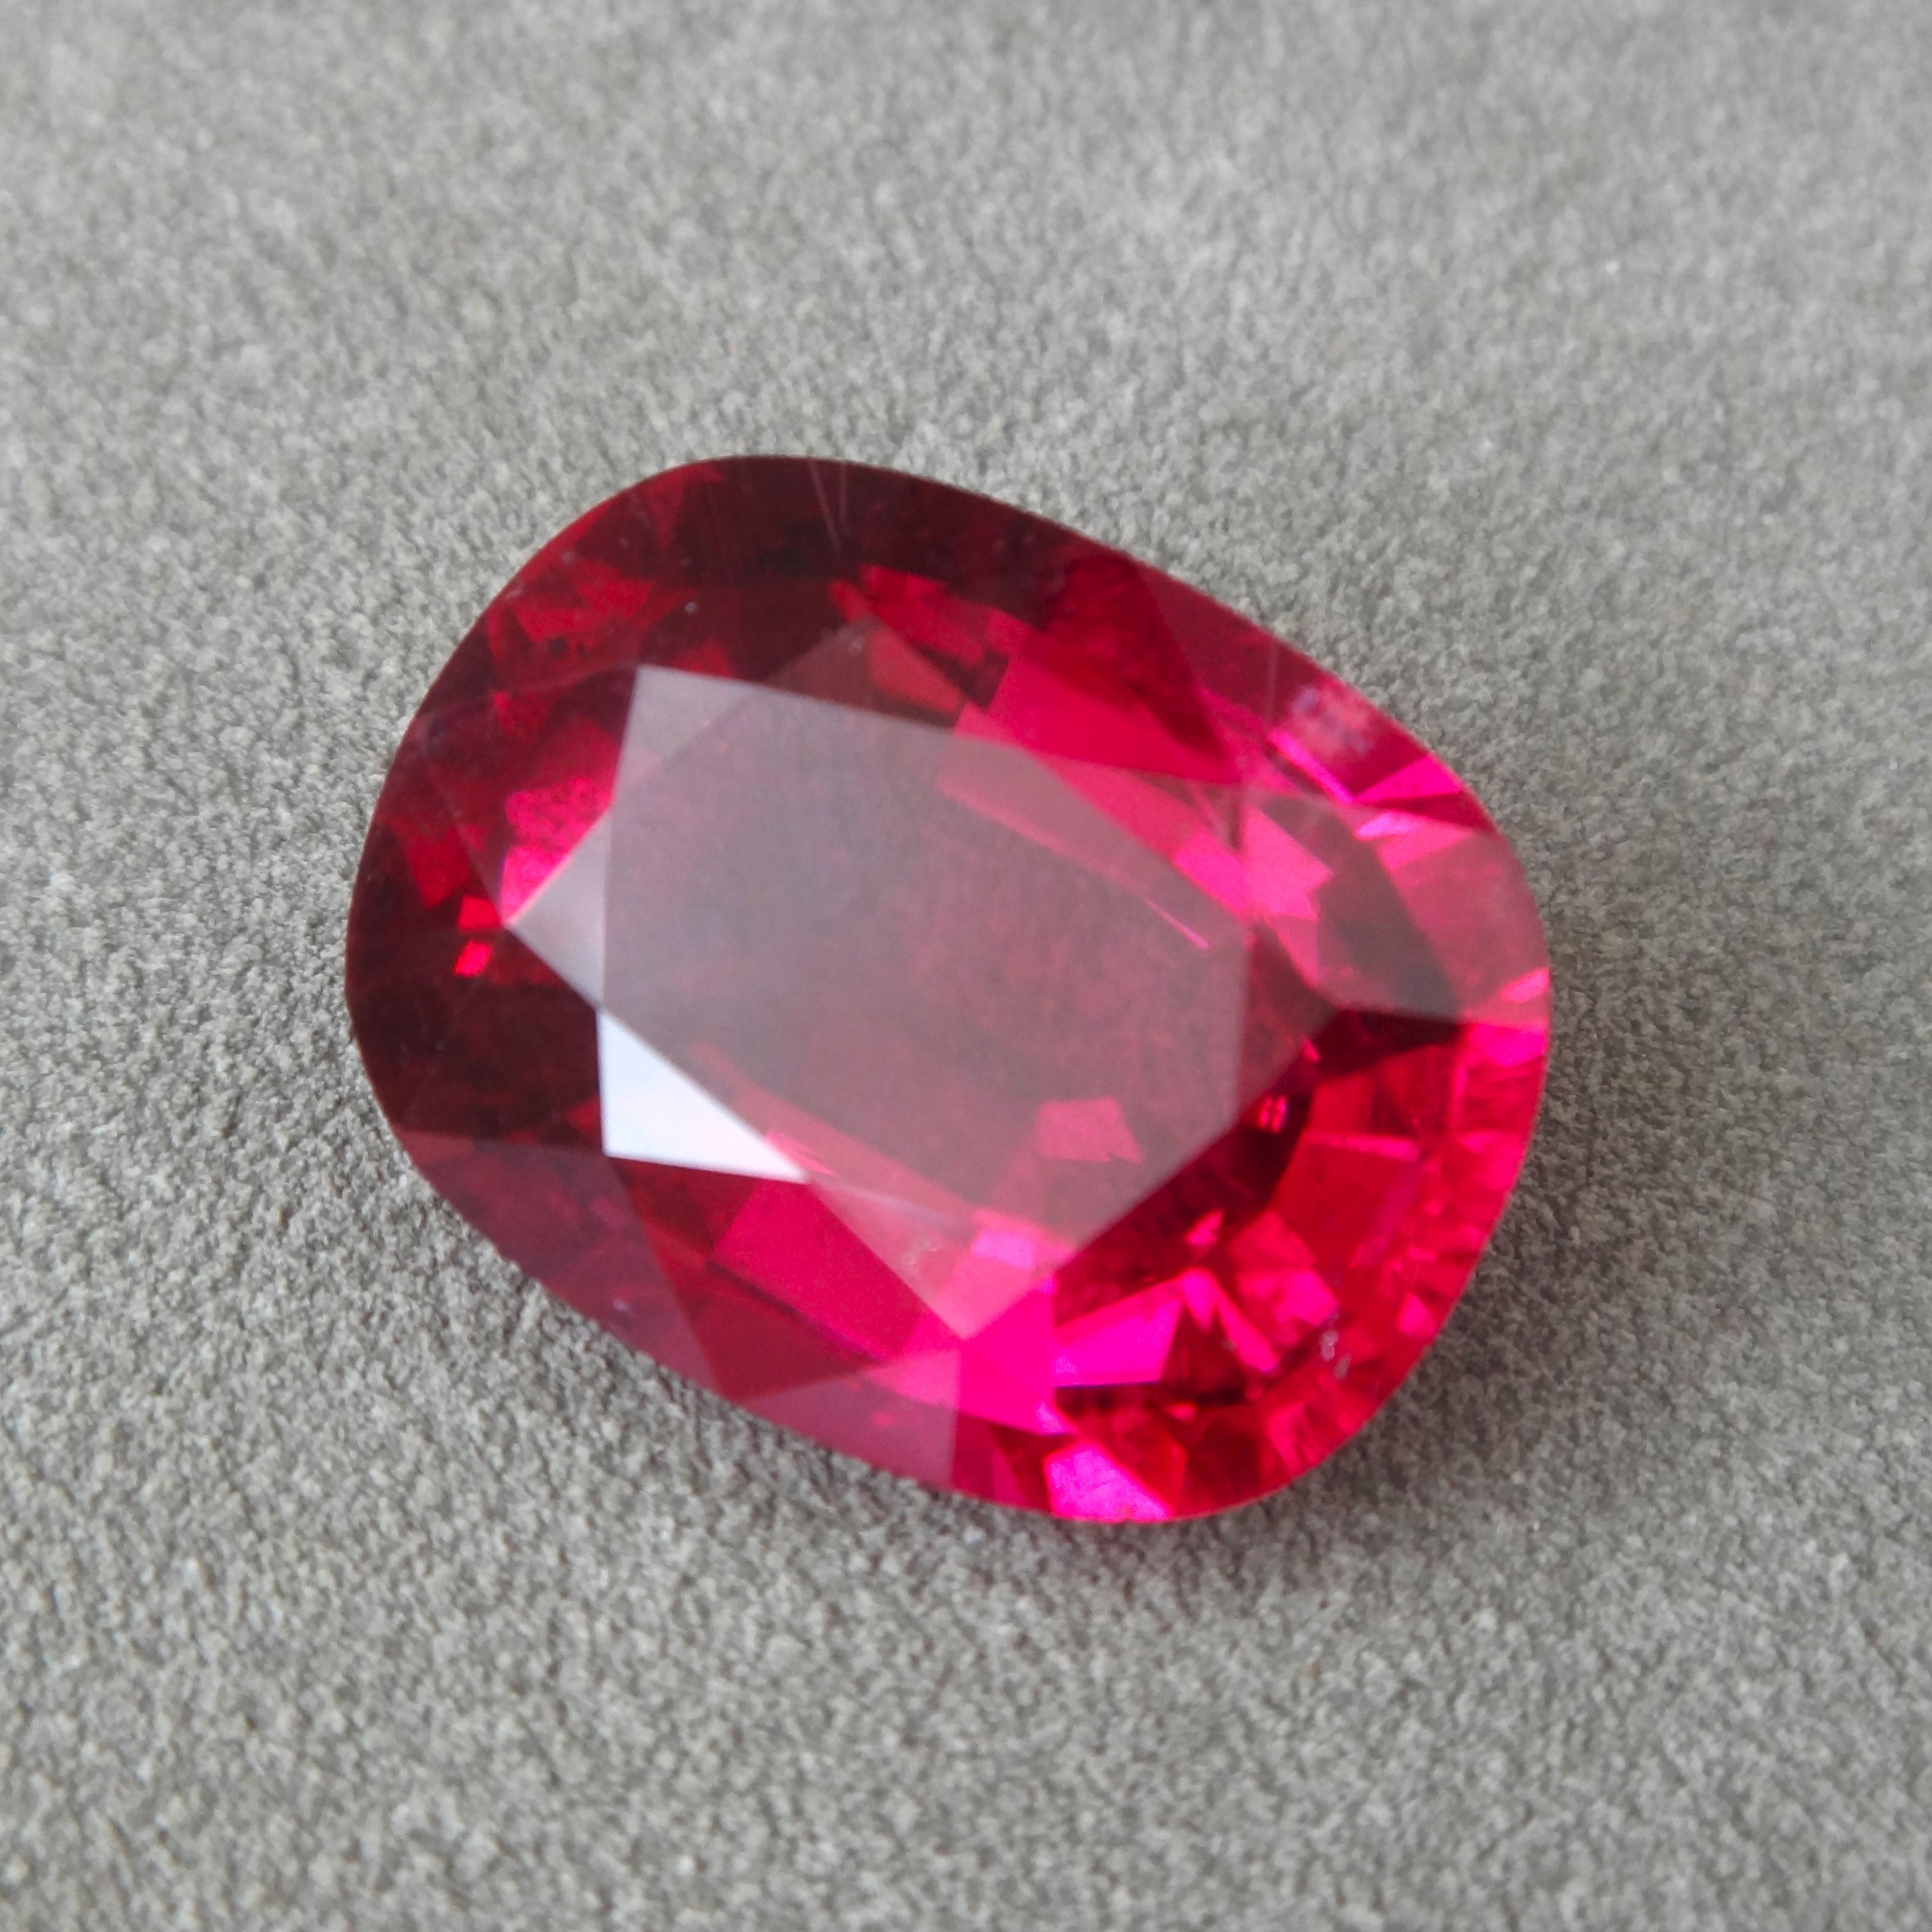 Remarkable  Rubelite Tourmaline oval-cut gem, offered loose to a gemstone lover.
Returns are accepted and paid by us within 7 days of delivery.